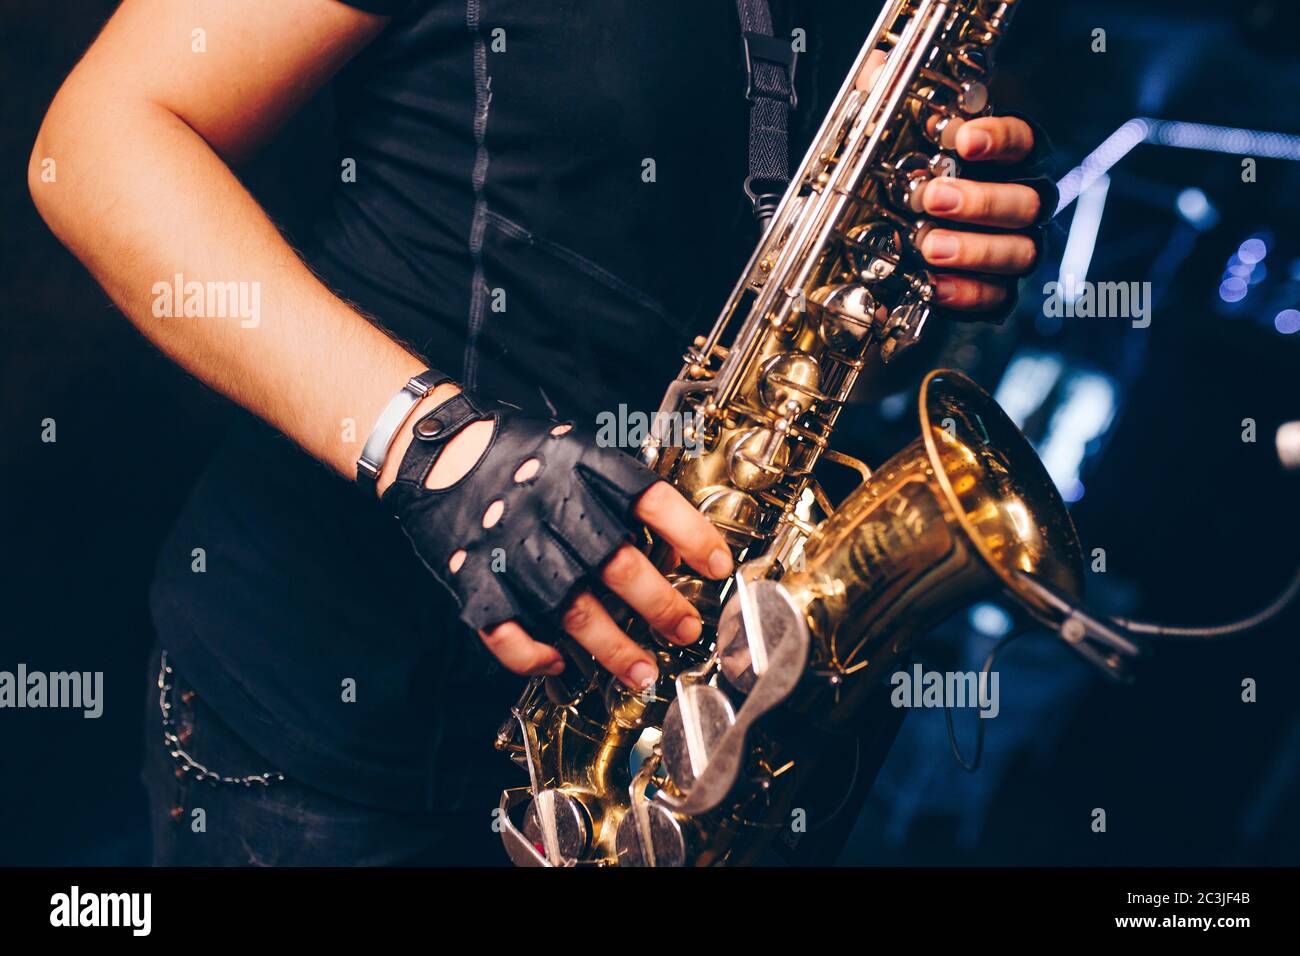 Boys Band saxophone section at event , jazz player male playing on Saxophone, music instrument played by man saxophonist  musician at  folk classical Stock Photo